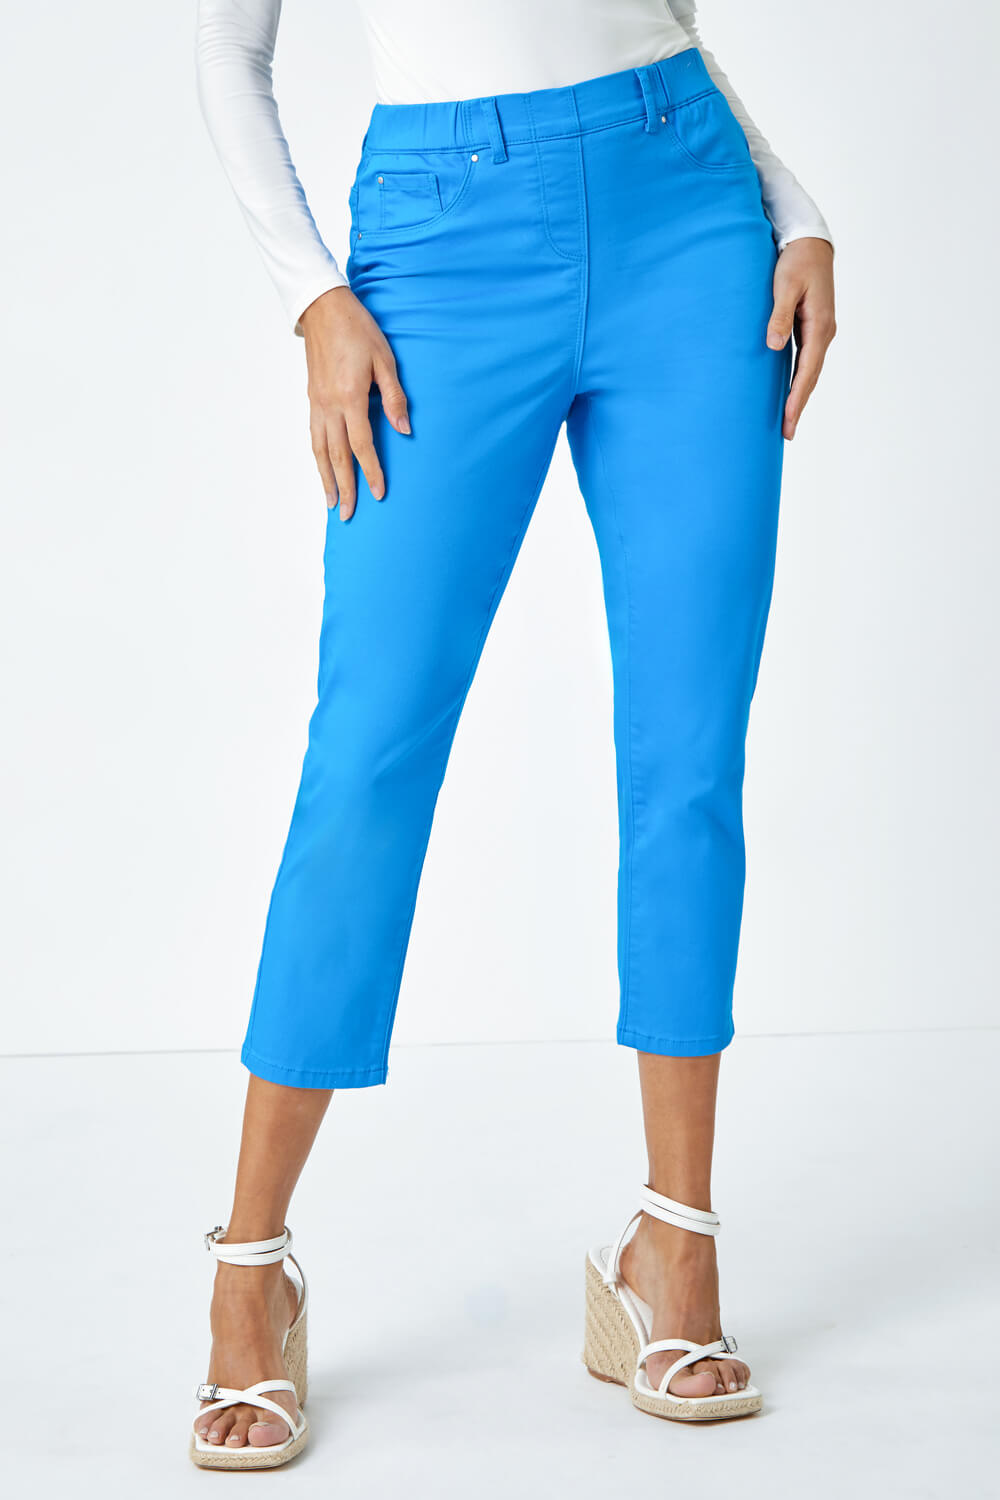 Turquoise Cropped Denim Stretch Jegging, Image 4 of 5